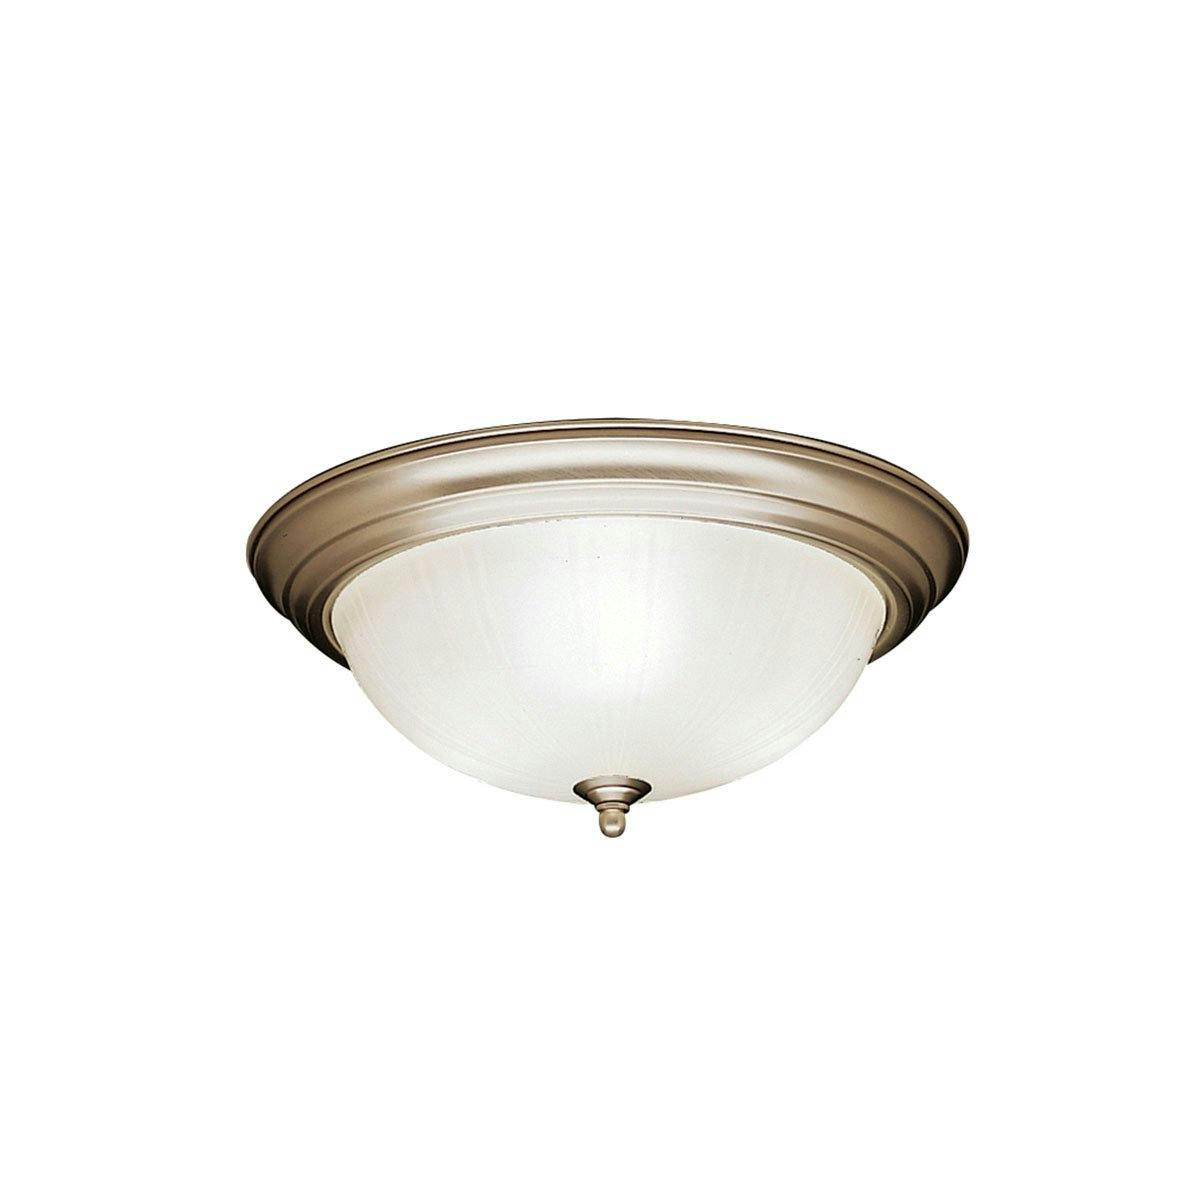 Hastings 15.25" Flush Mount Nickel on a white background